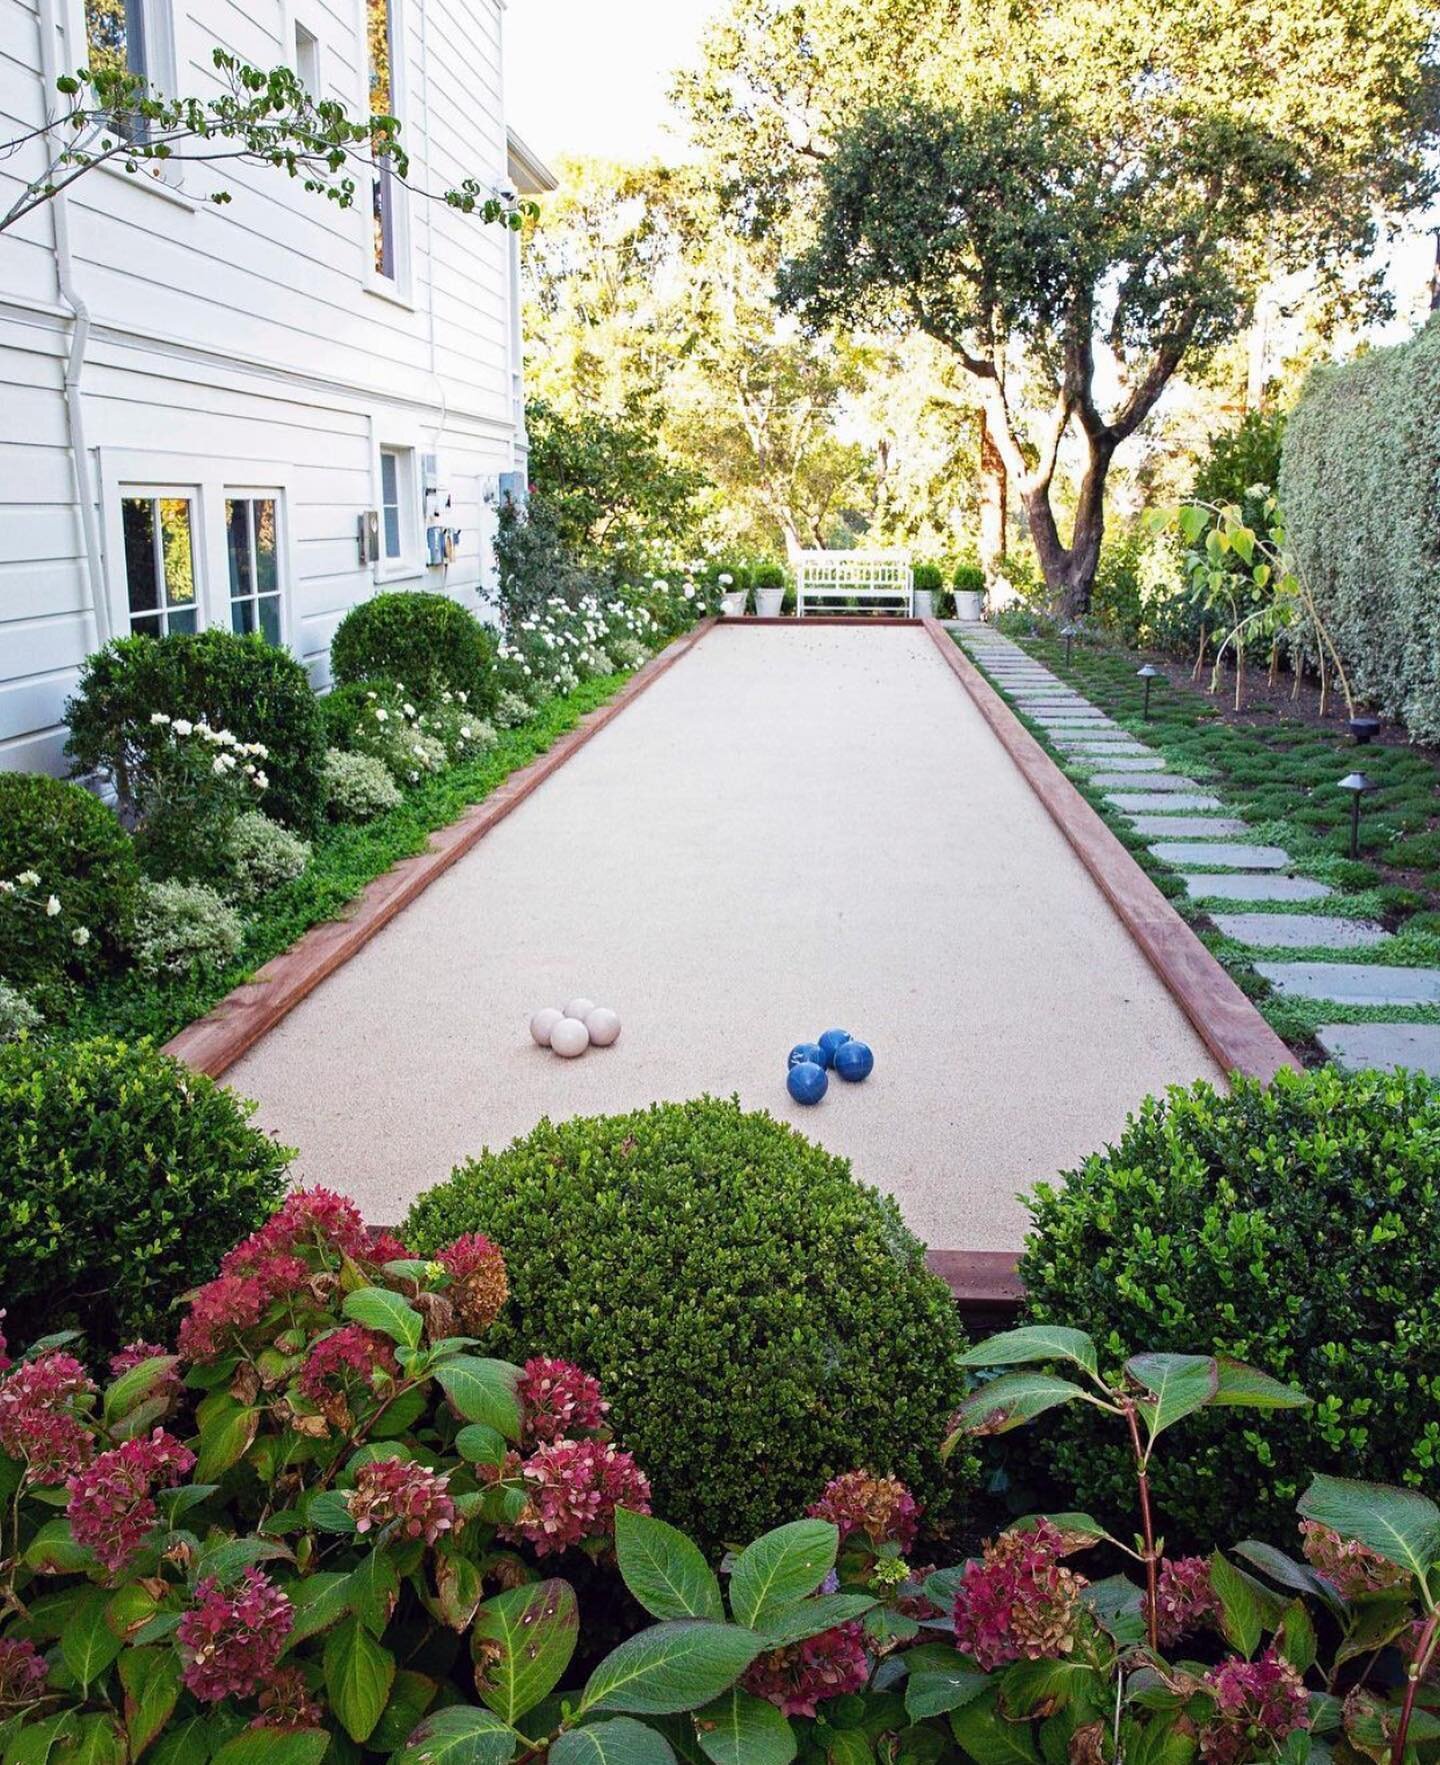 If only we had thought to put in a bocce court with our landscape overhaul. Gorgeous design! @denlerhobartgardens @kenlinsteadtarchitects @markdsikes @housebeautiful